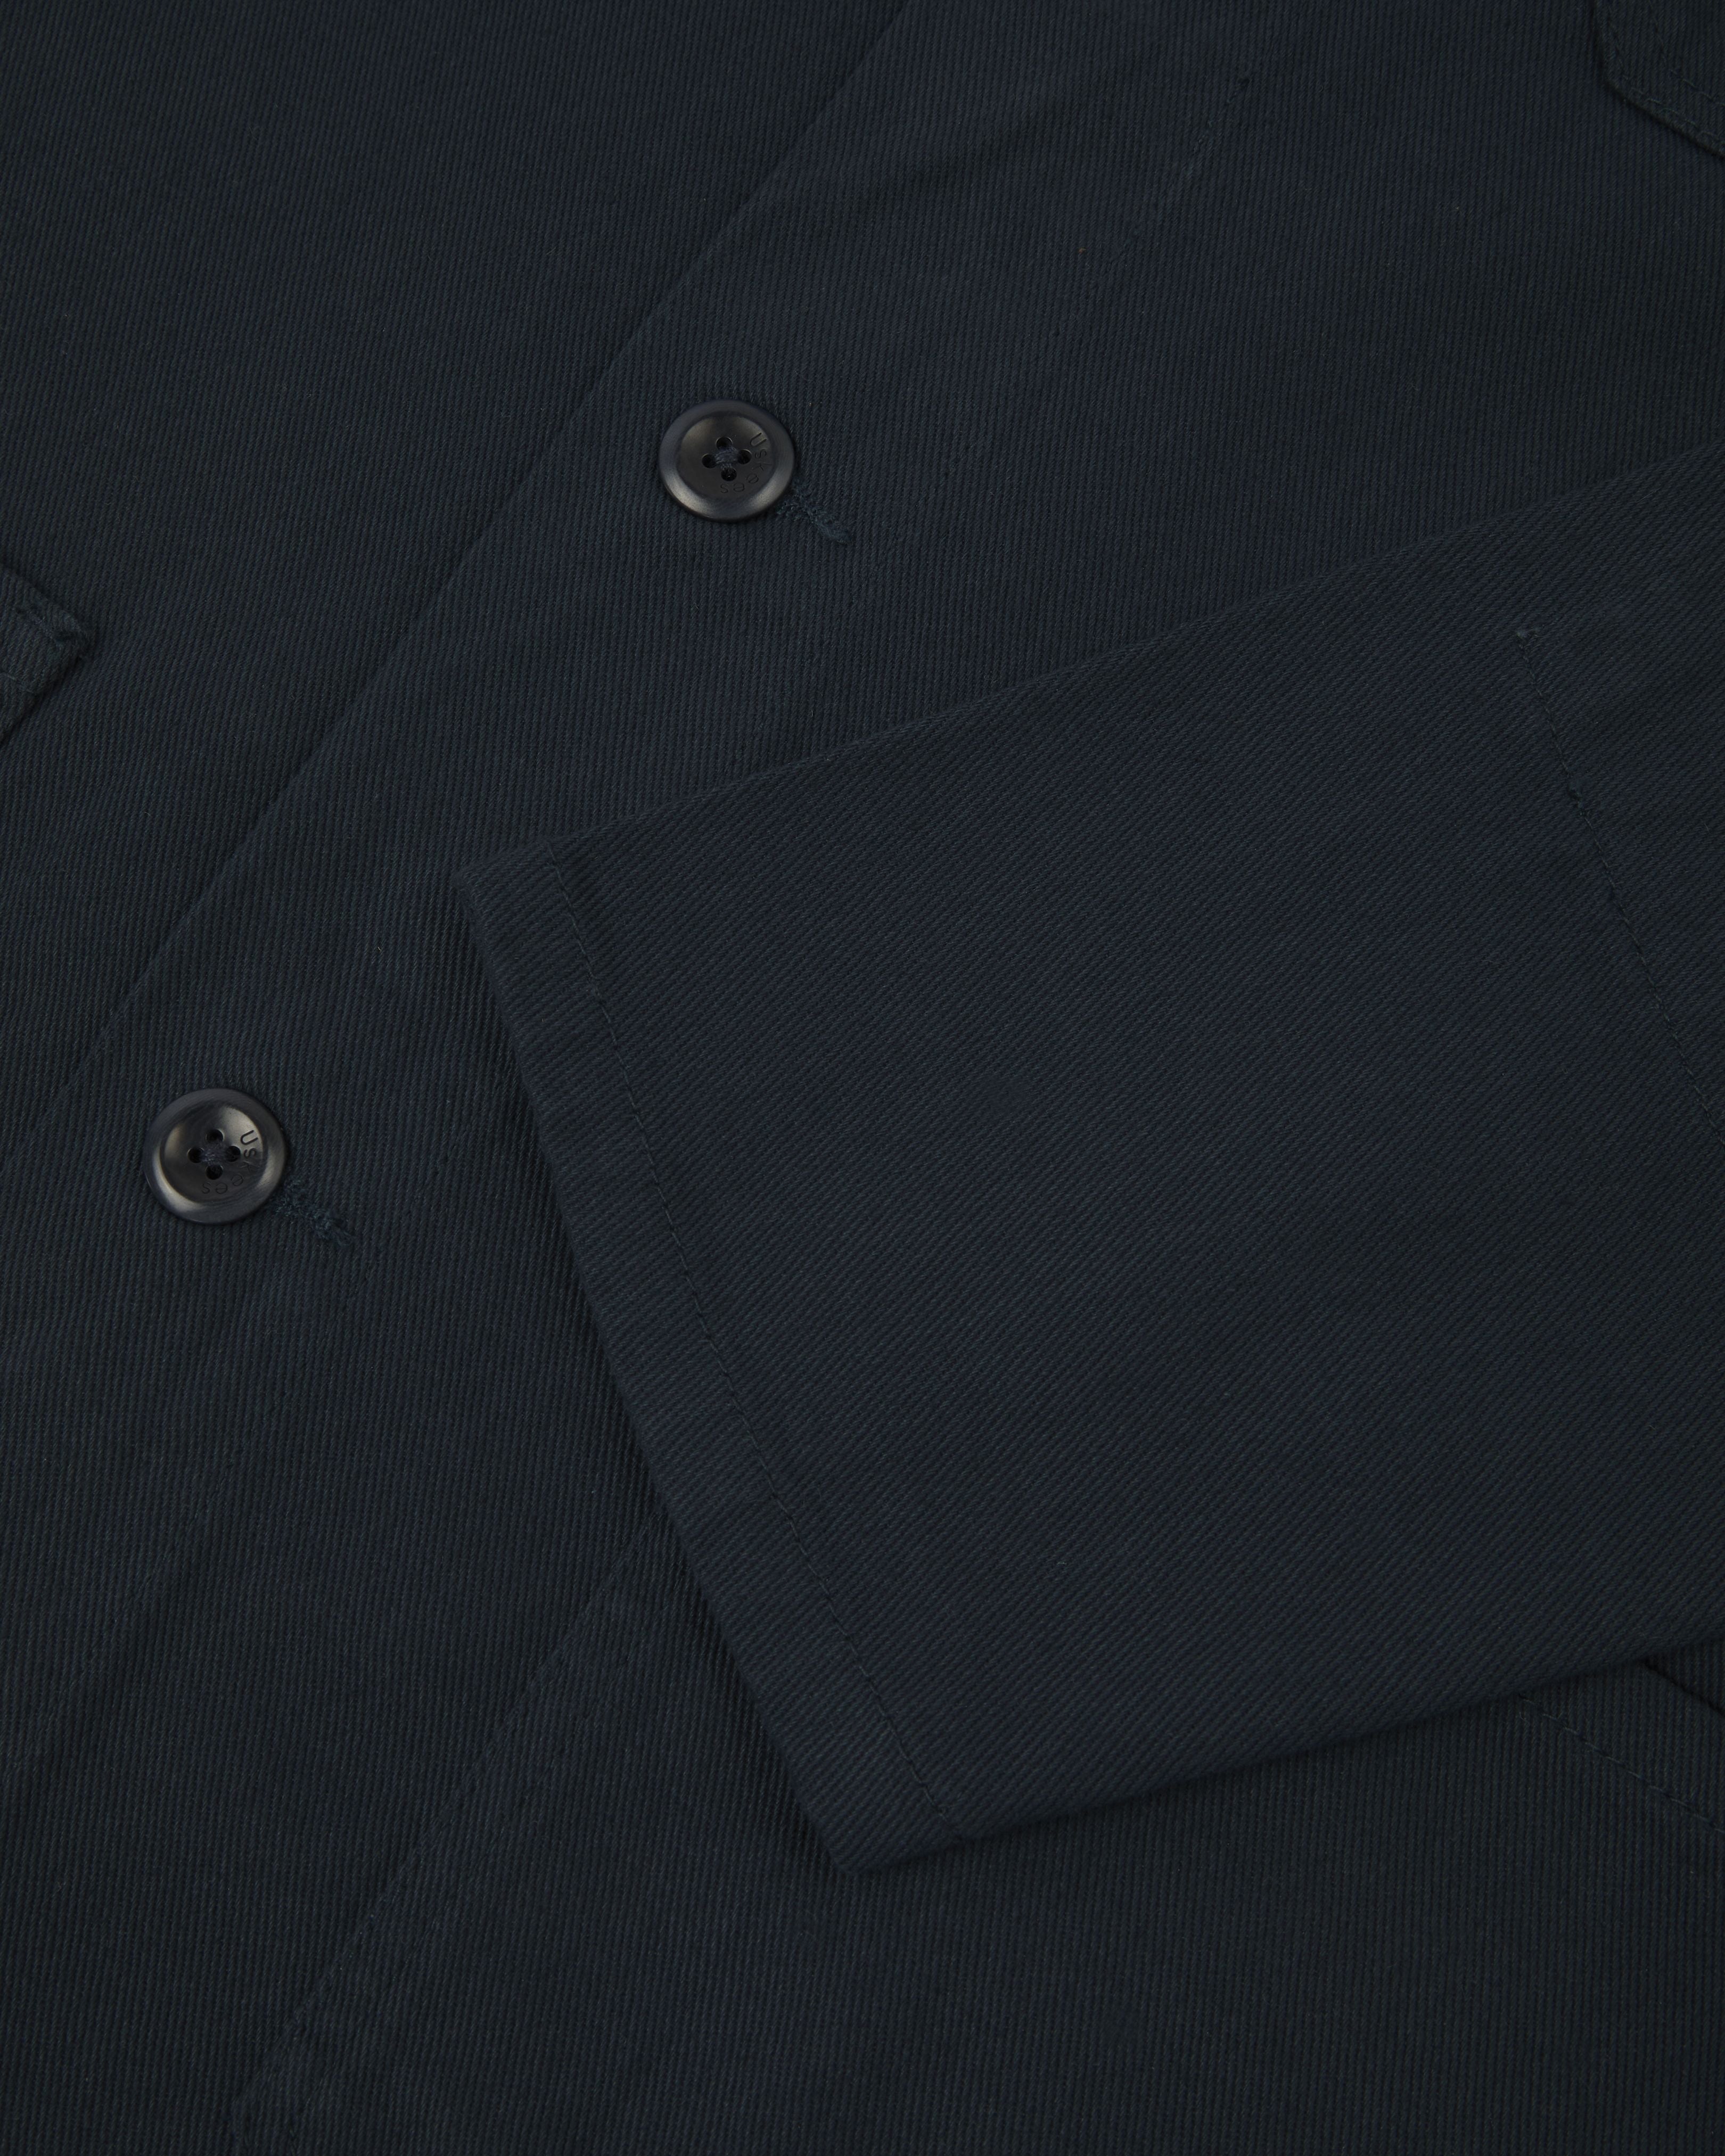 Detail shot of dark-blue buttoned organic cotton-drill shirt/jacket from Uskees. Showing sleeve and blue corozo buttons.